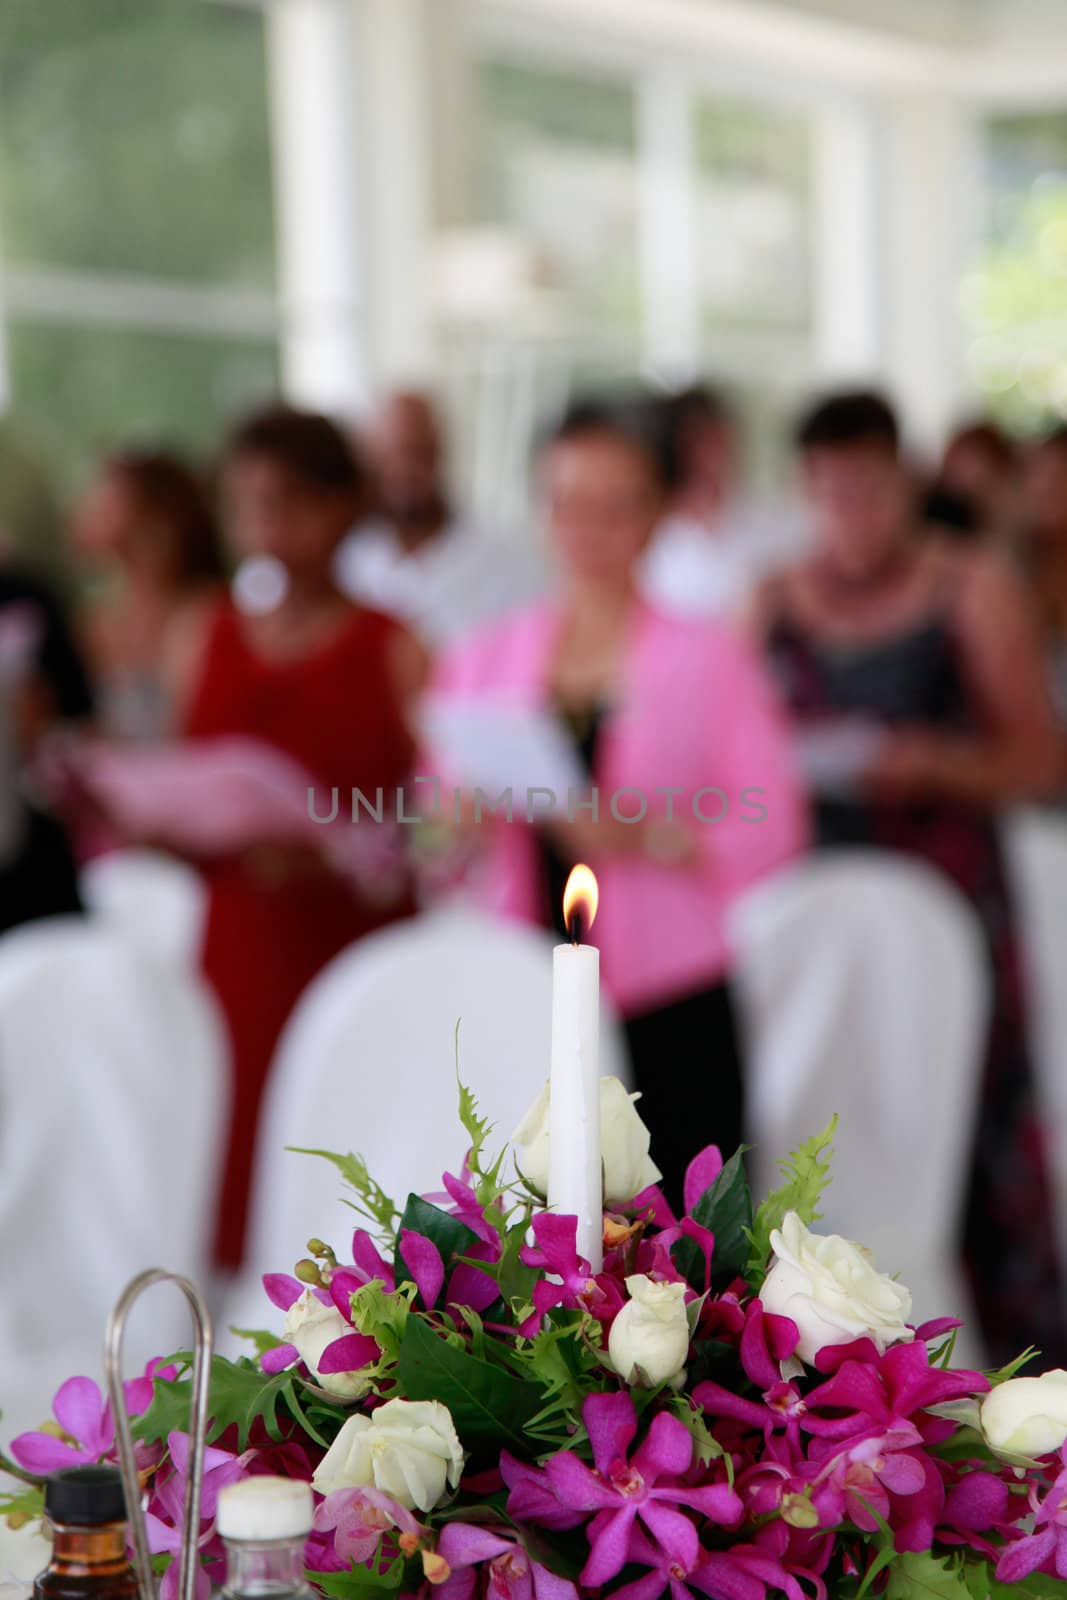 Candle burning during a wedding ceremony inside a church.